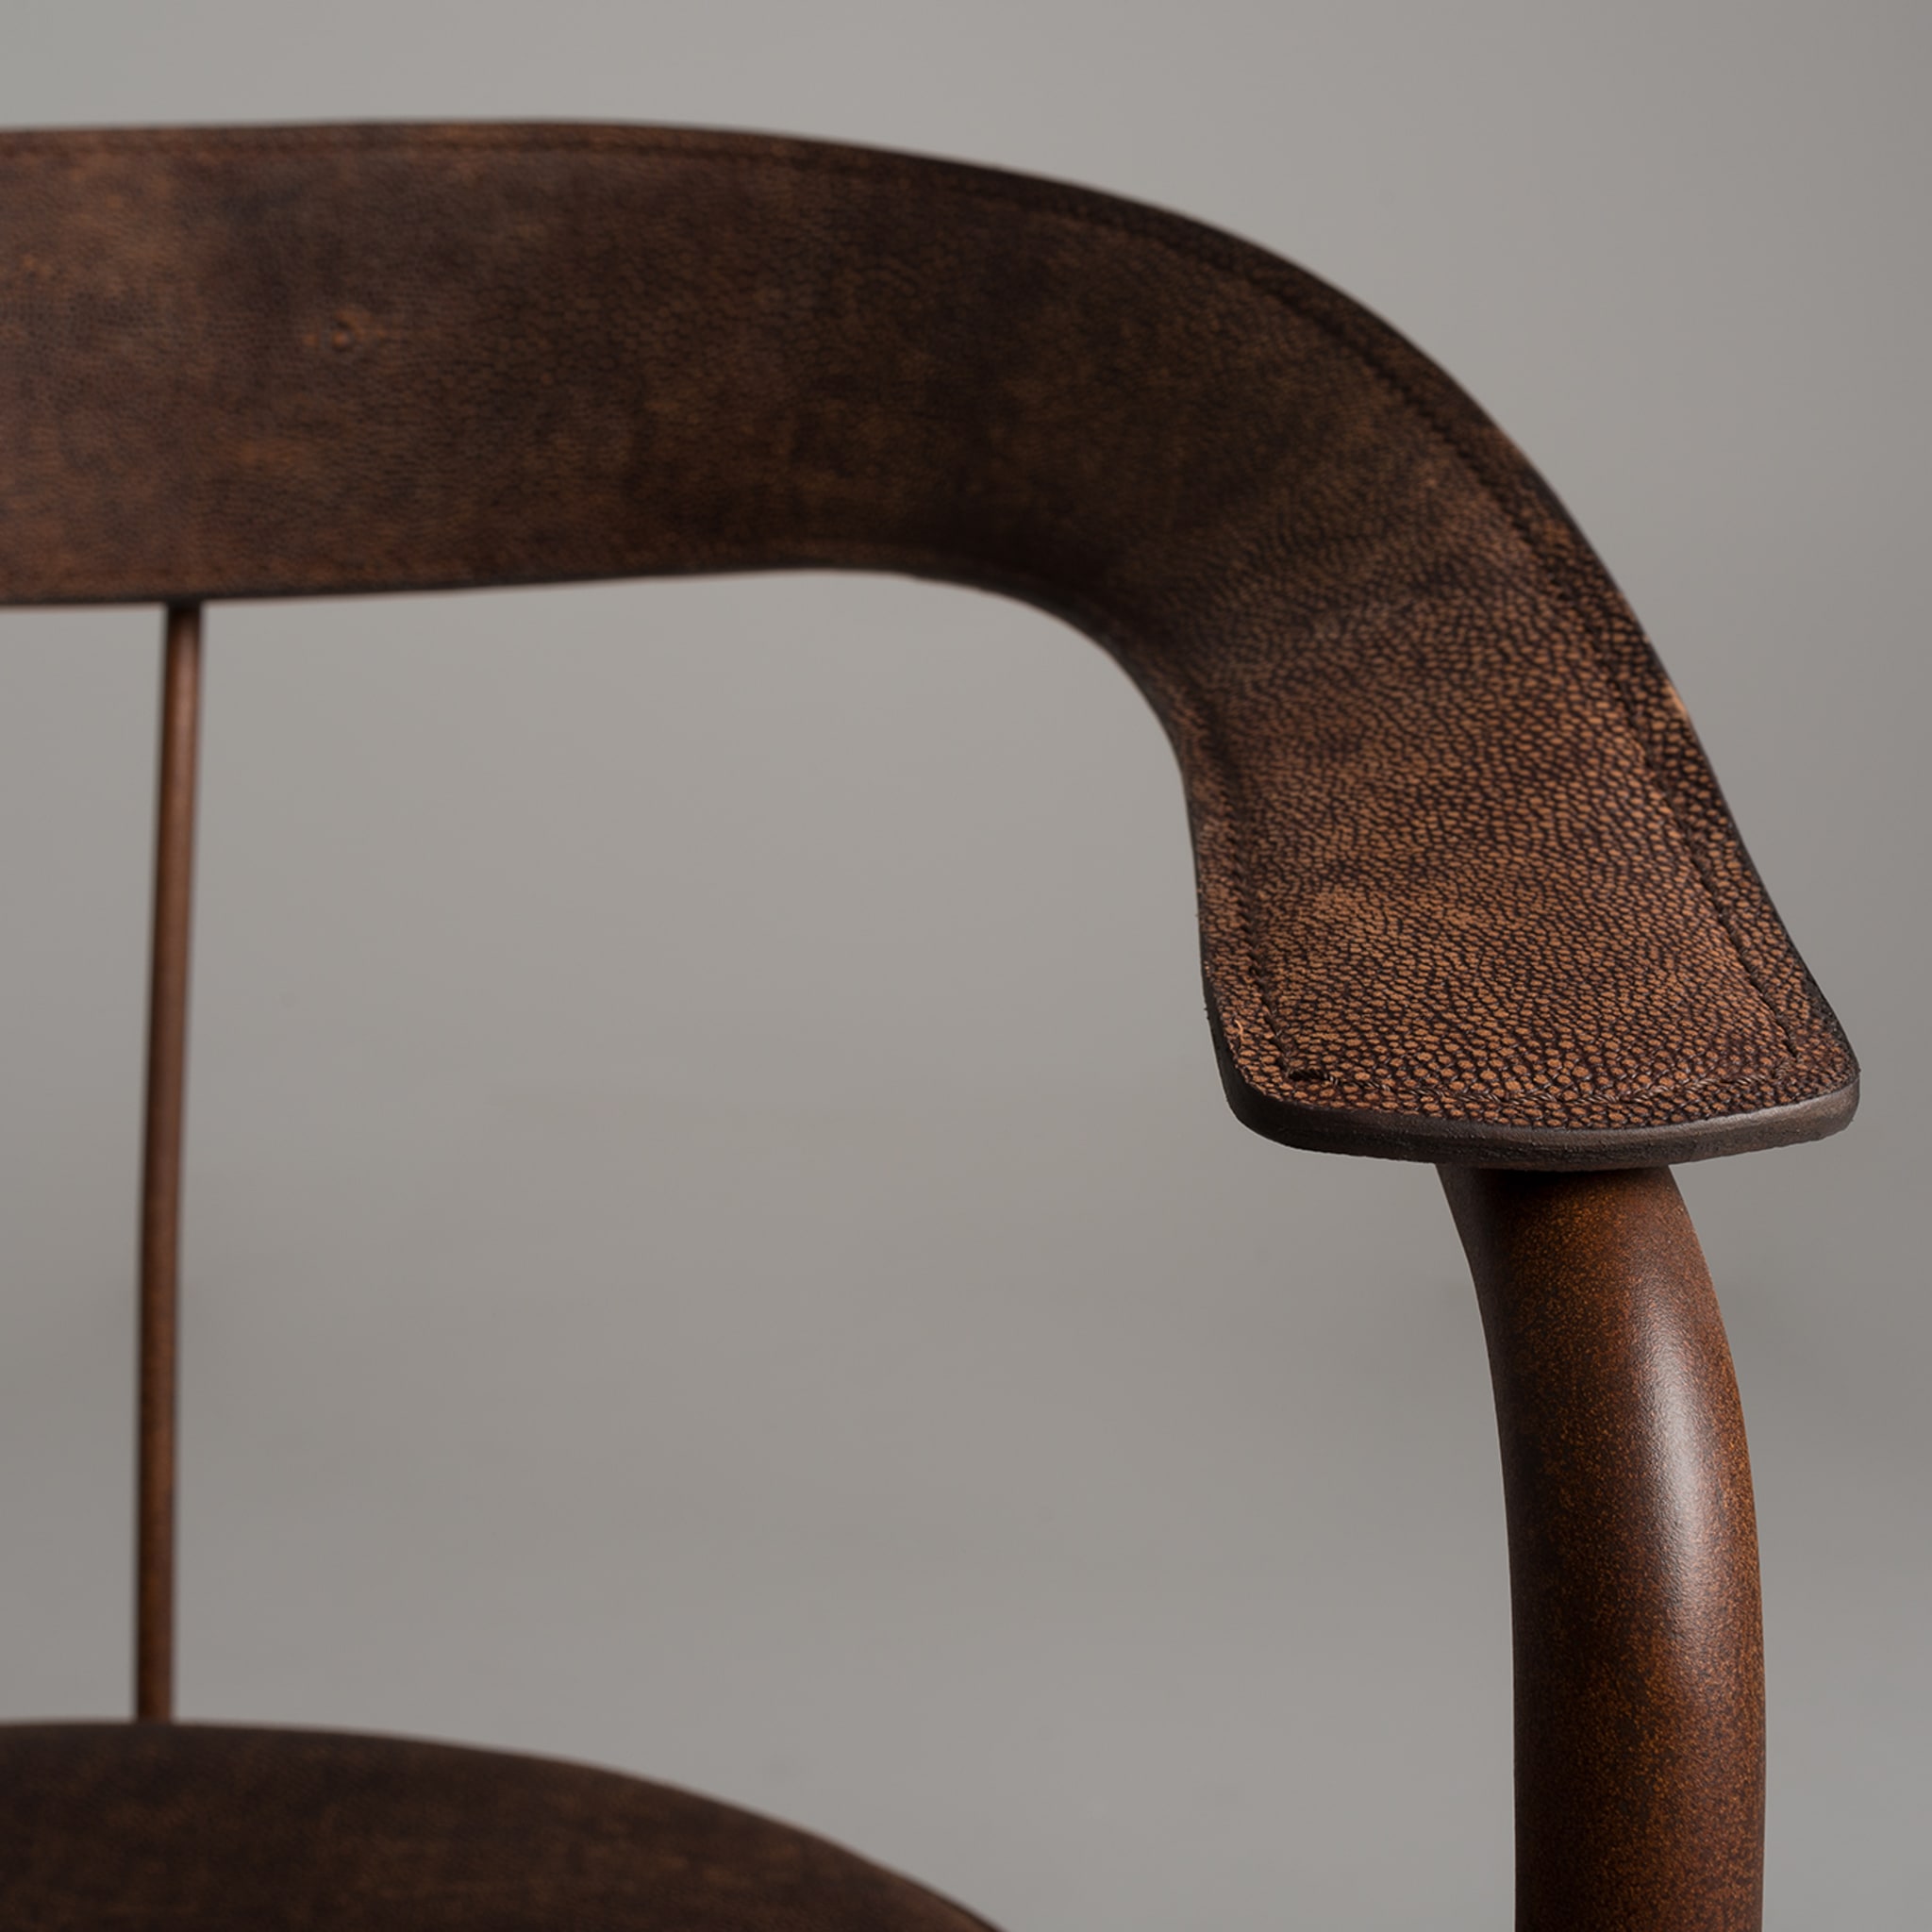 Parabolica Chair by Marco and Giulio Mantellassi - Alternative view 1